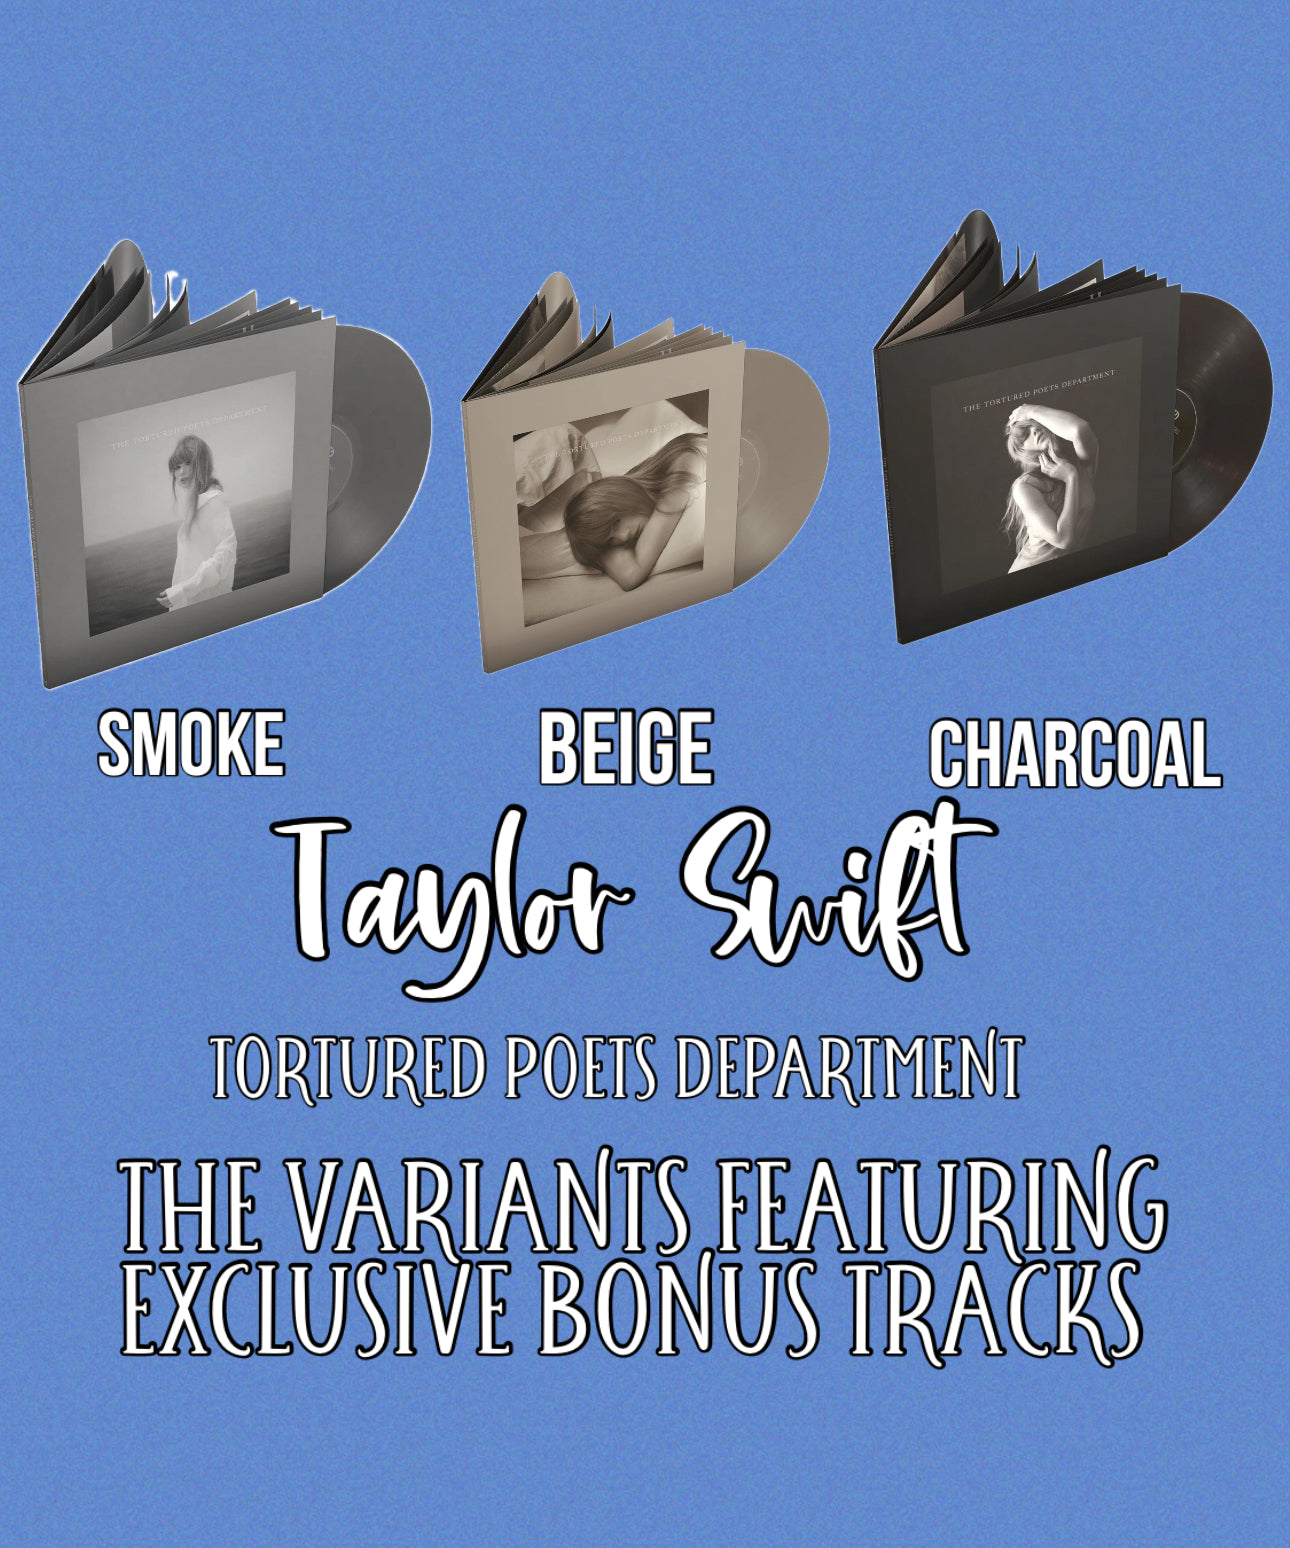 Taylor Swift - Tortured Poets Department: THE 3 VARIANTS